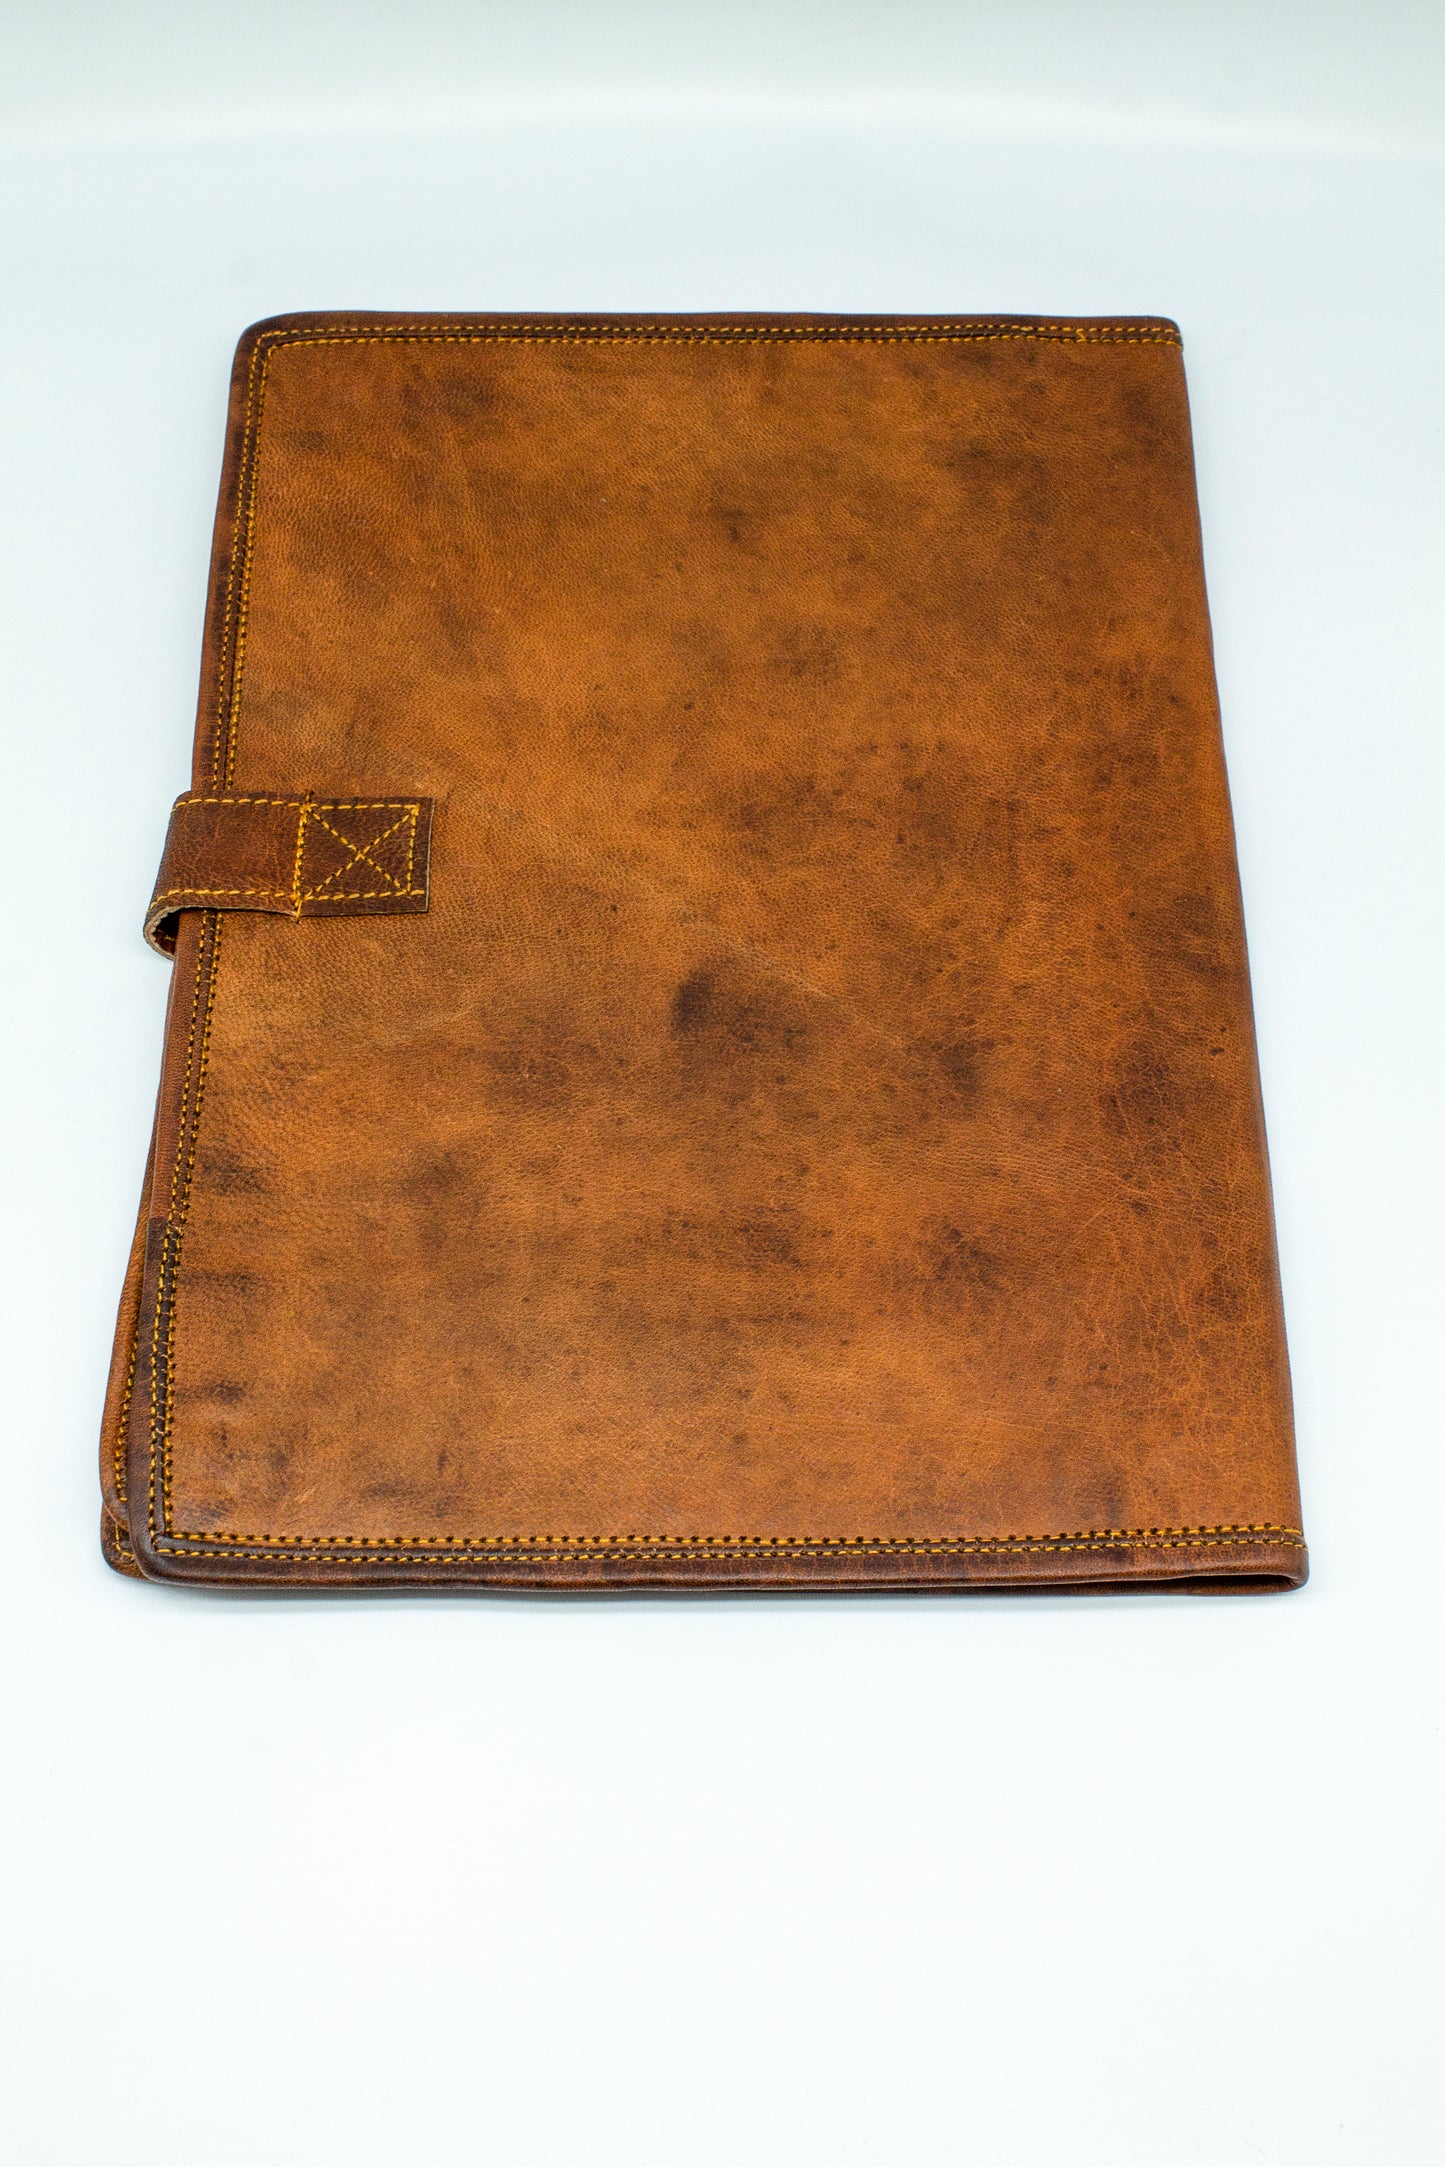 Goat Leather Book Cover With Buckle - A4